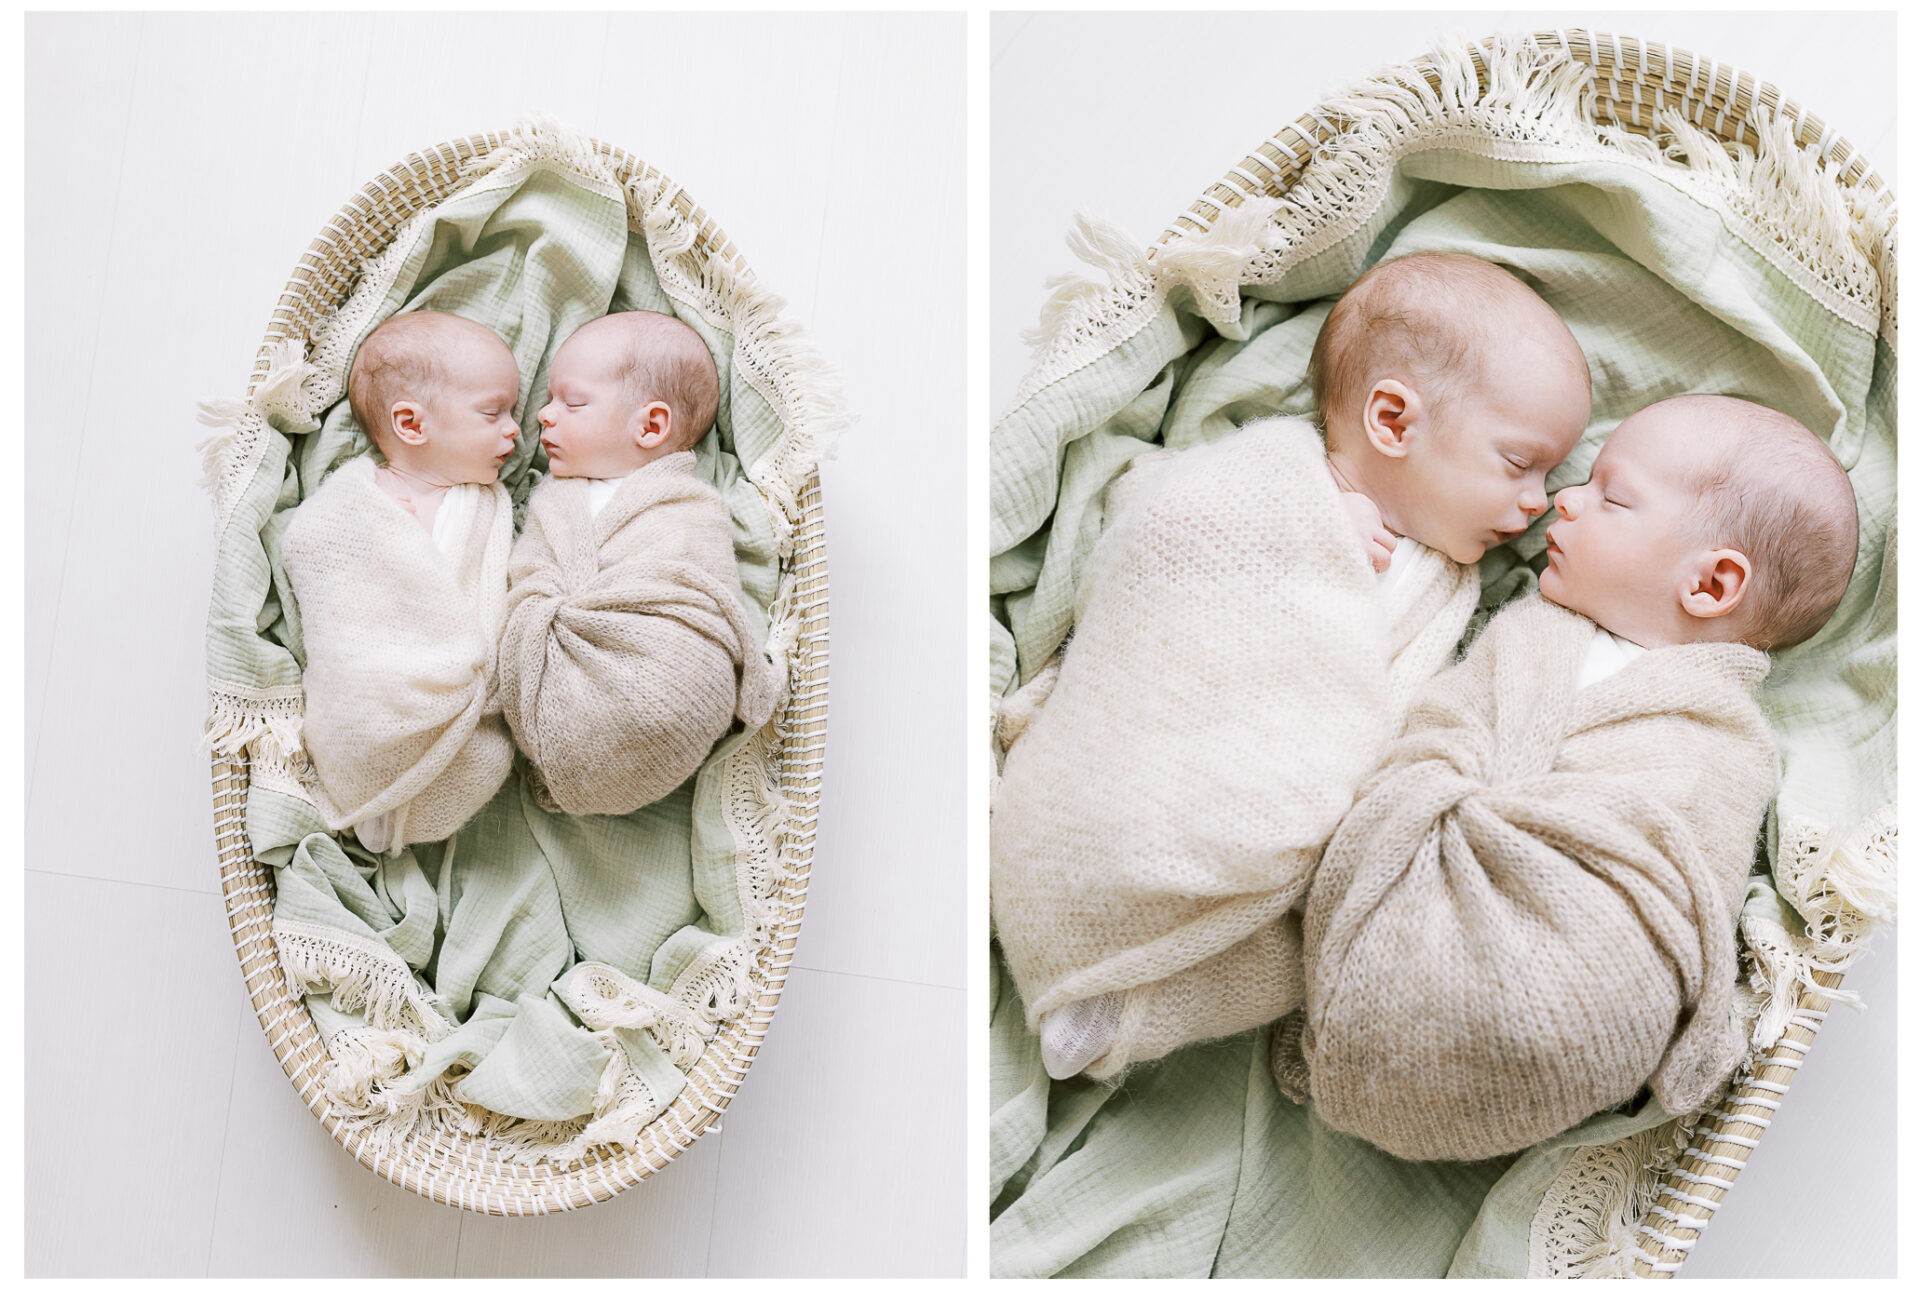 Newborn baby boys swaddled and snuggled together in a cozy basket | Twin newborn sessions are extra sweet because the bond between womb-mates encompasses the most beautiful organic connection, one that starts from the very beginning and lasts a lifetime.